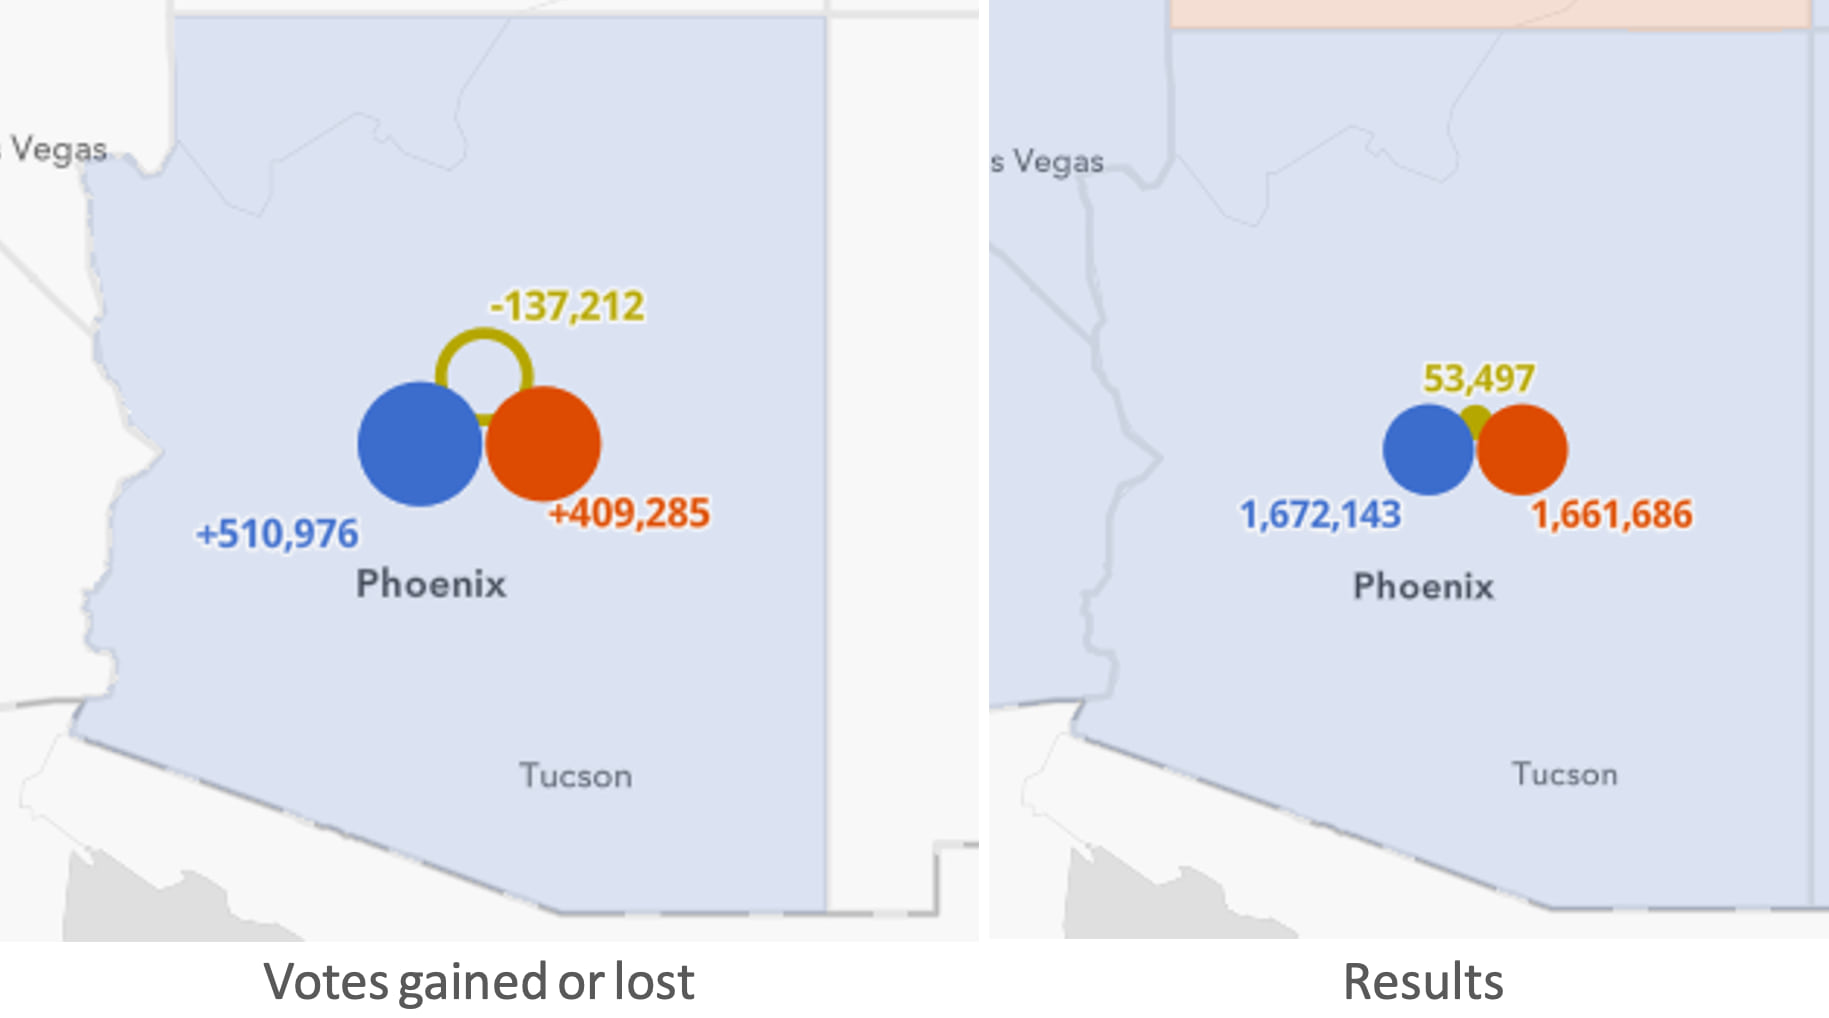 Arizona state shift in votes and total votes